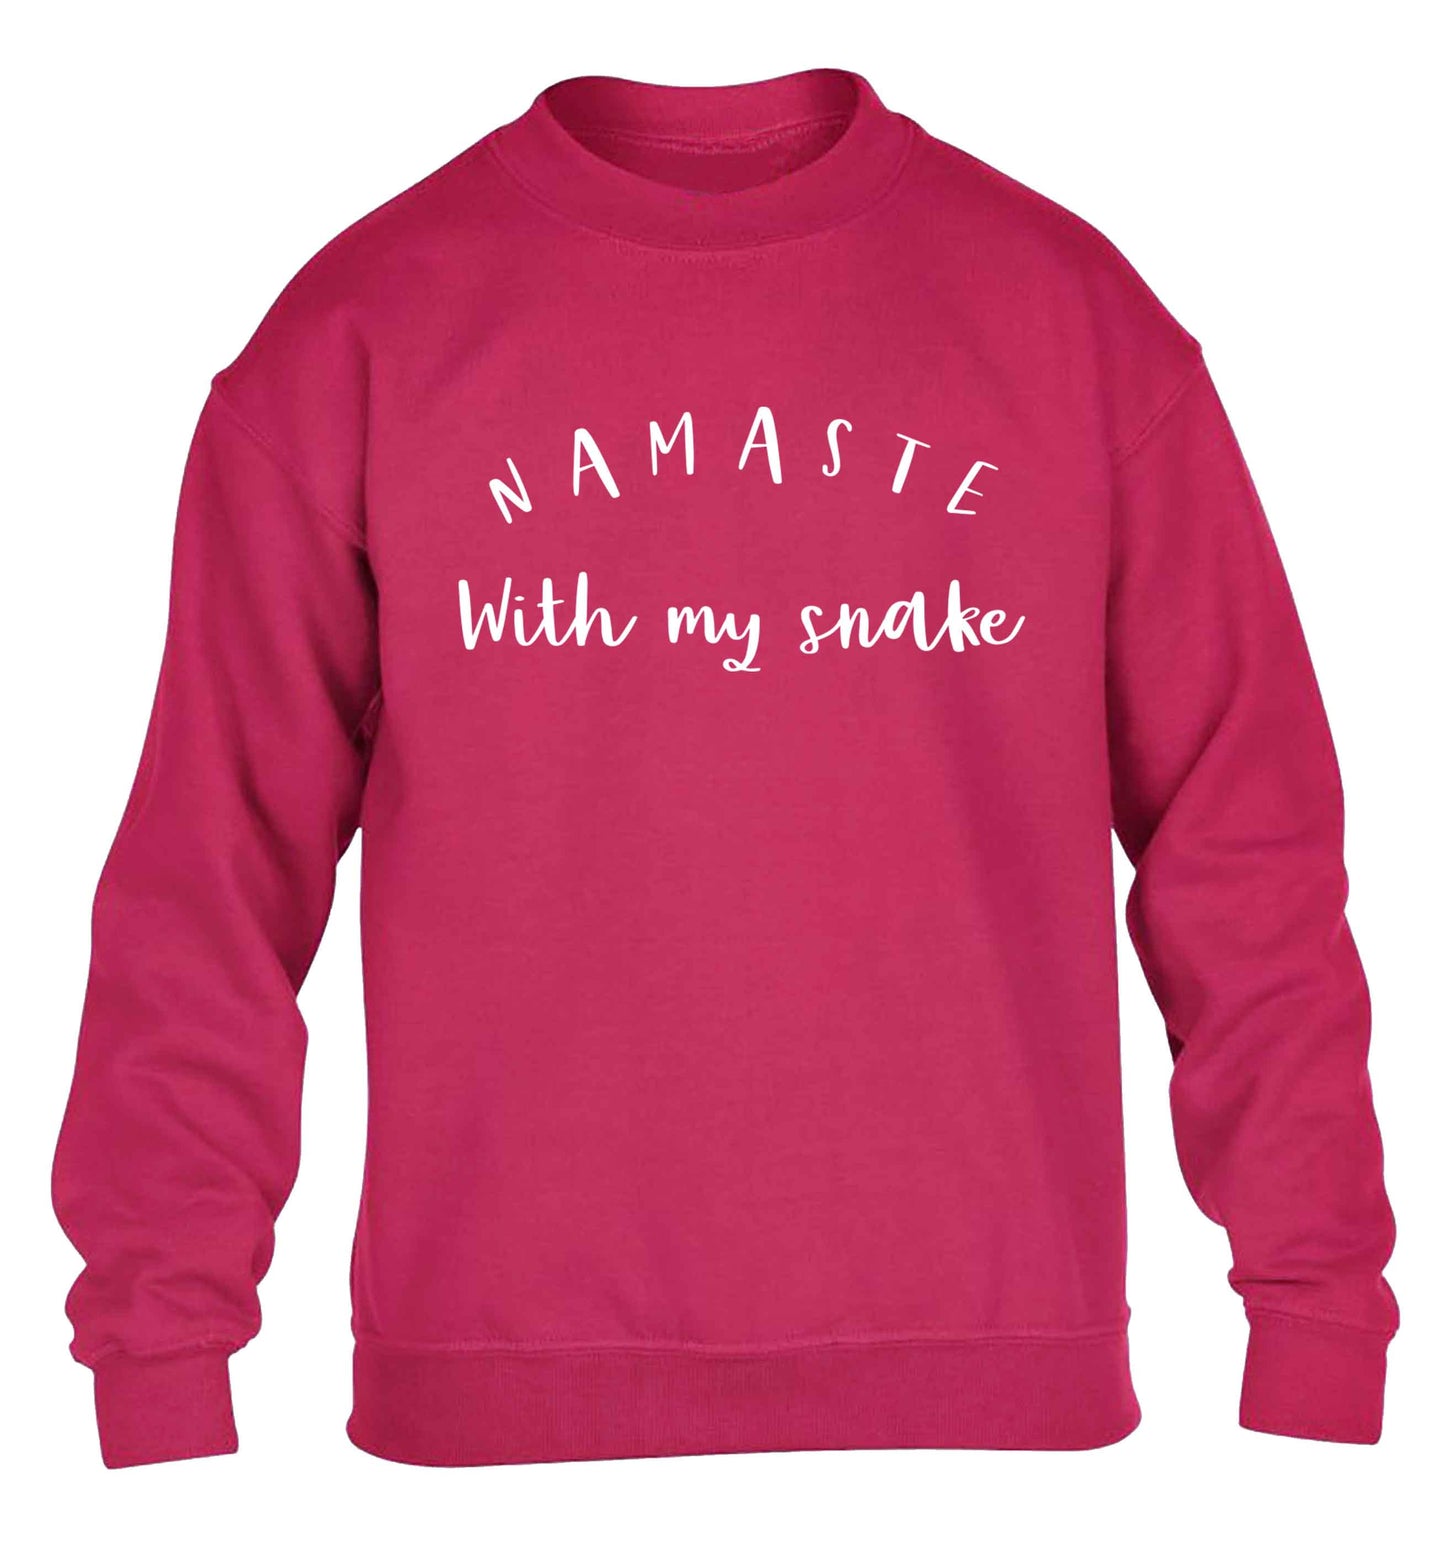 Namaste with my snake children's pink sweater 12-13 Years